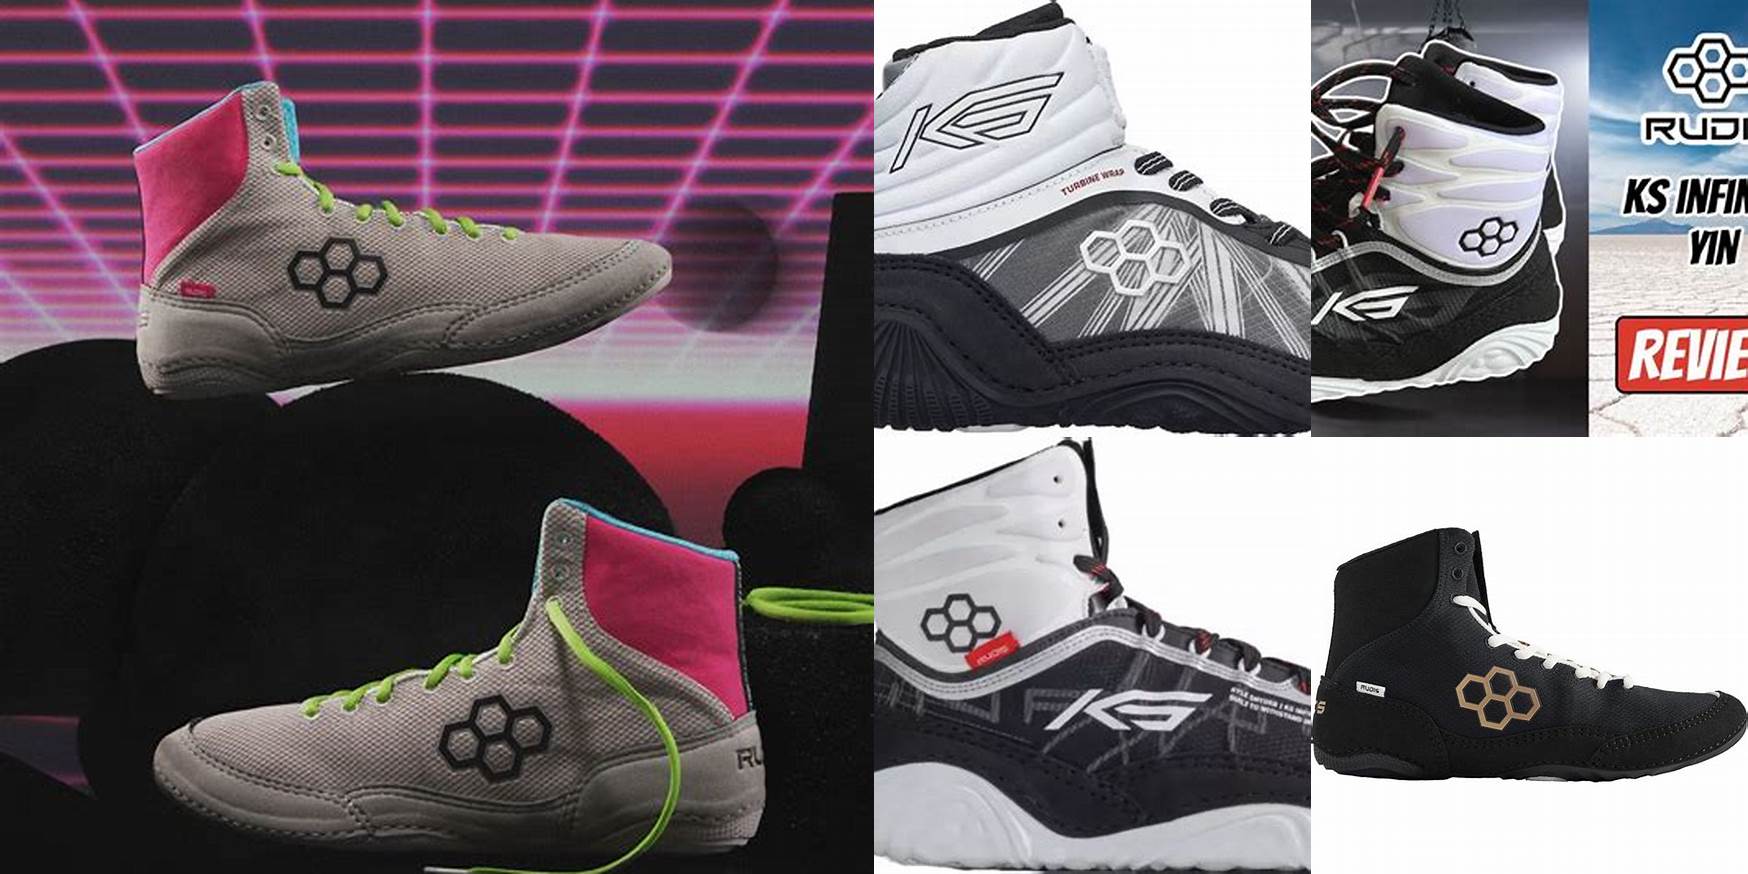 Are Rudis Wrestling Shoes Good